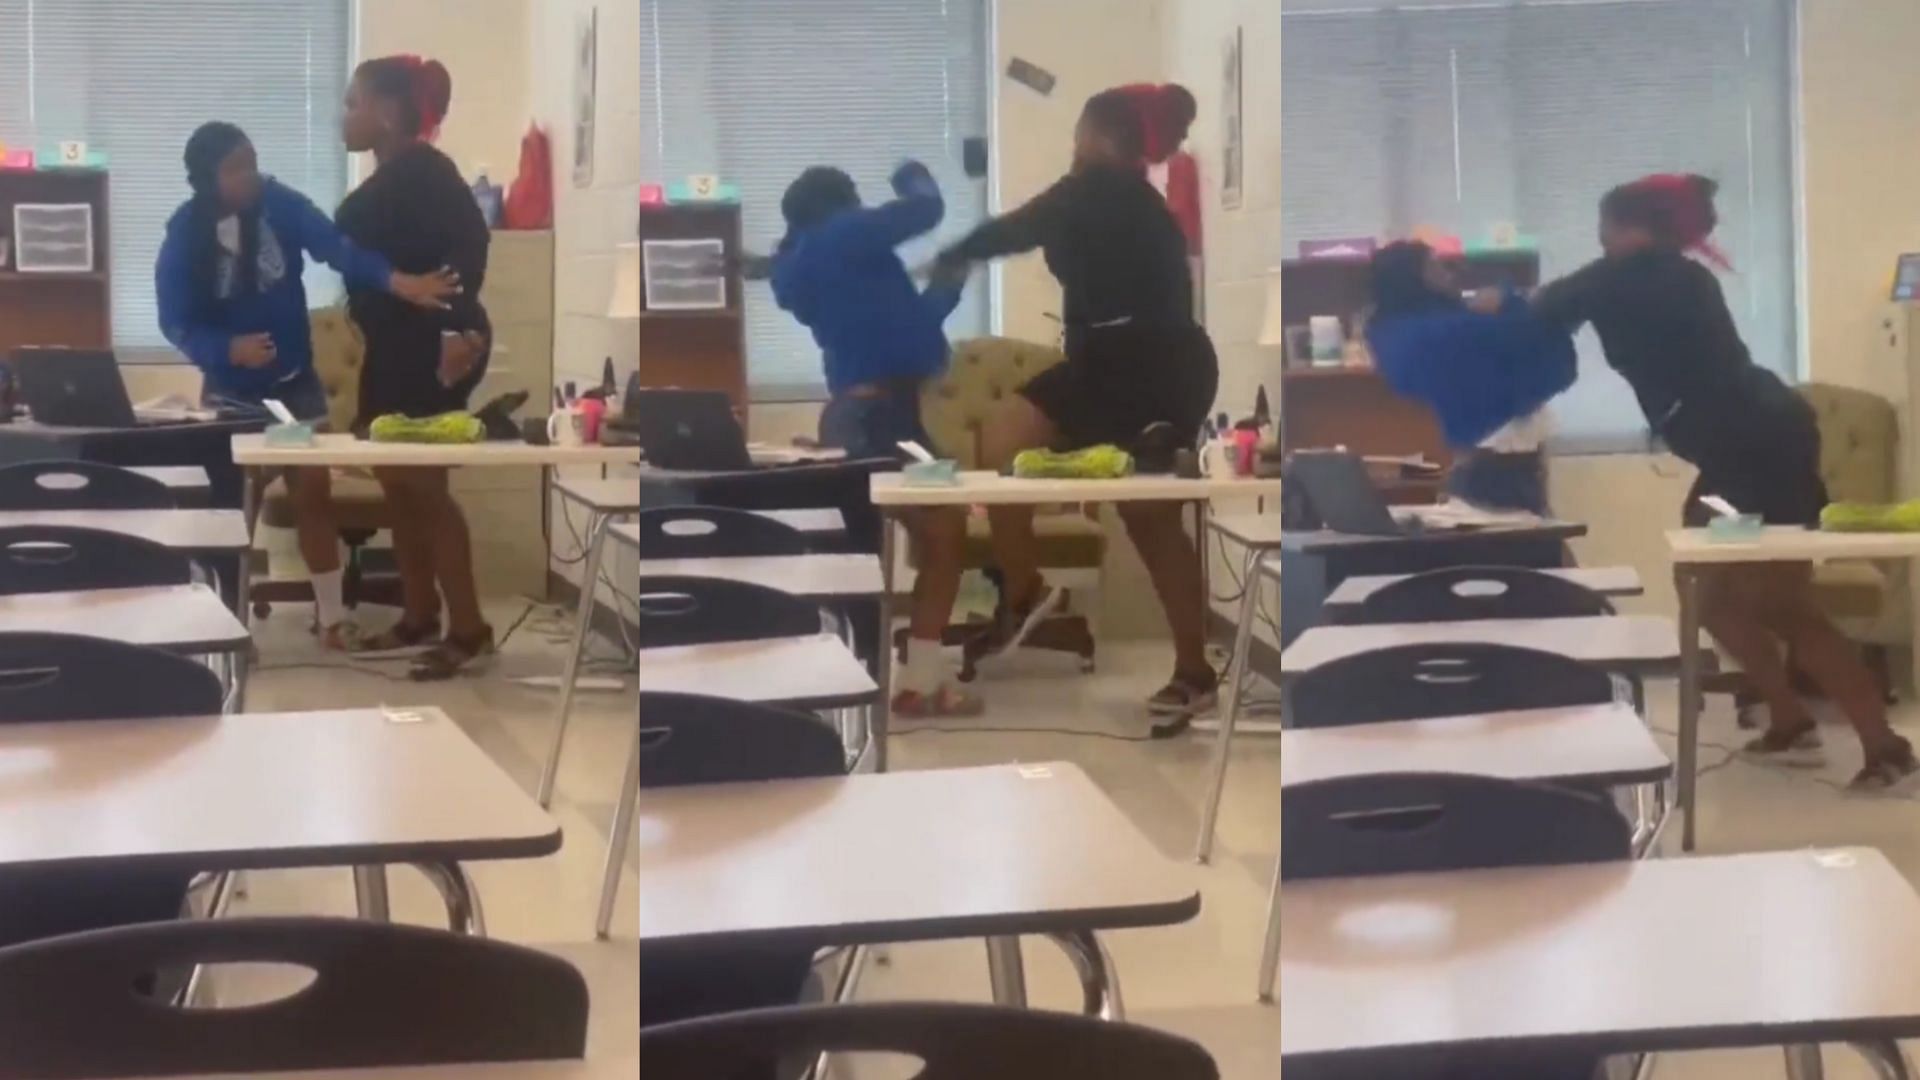 Physical fight between teacher and student at Rocky Mount High School prompts police investigation (Image via FightHaven/Twitter)